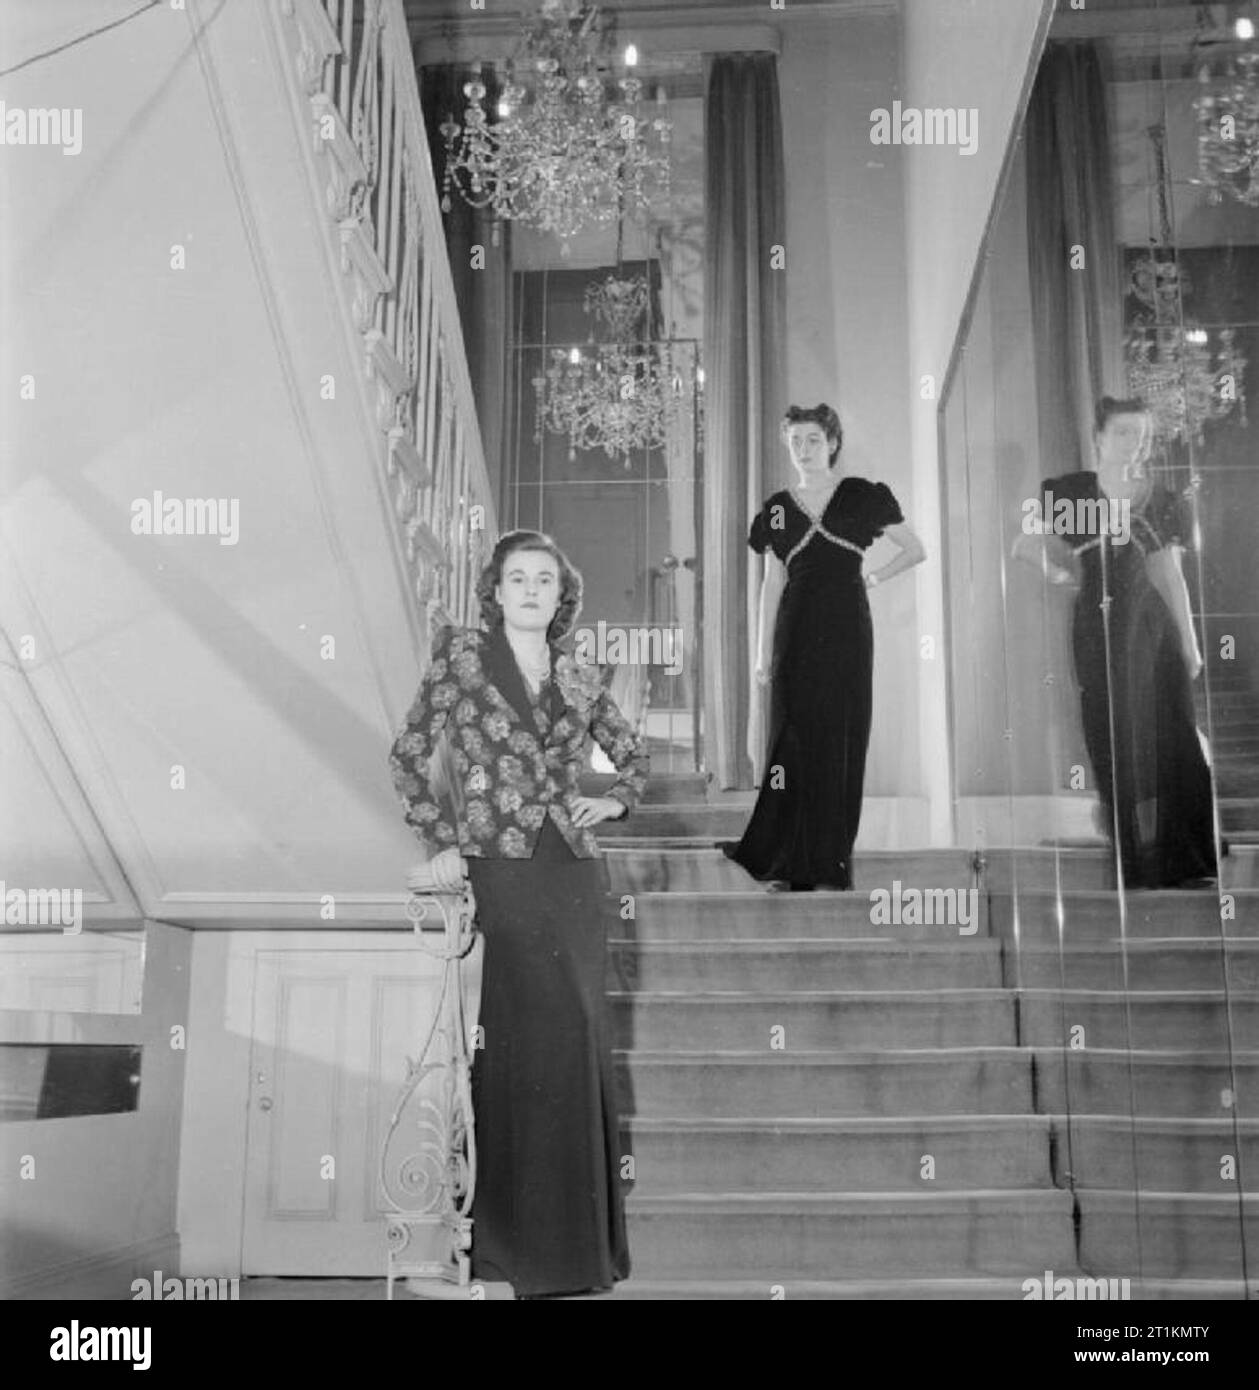 London Fashion Designers- the work of Members of the Incorporated Society of London Fashion Designers in Wartime, London, England, UK, 1944 Two models pose for the camera on a staircase at the fashion house of designer Norman Hartnell. At the top of the stairs, the model wears a black velvet dinner gown studded in blue and gold. In the foreground, the model wears a dinner suit with the jacket made from a red rose printed fabric, designed by Hartnell and a skirt of black crepe. A large chandelier is clearly visible in the background. Stock Photo